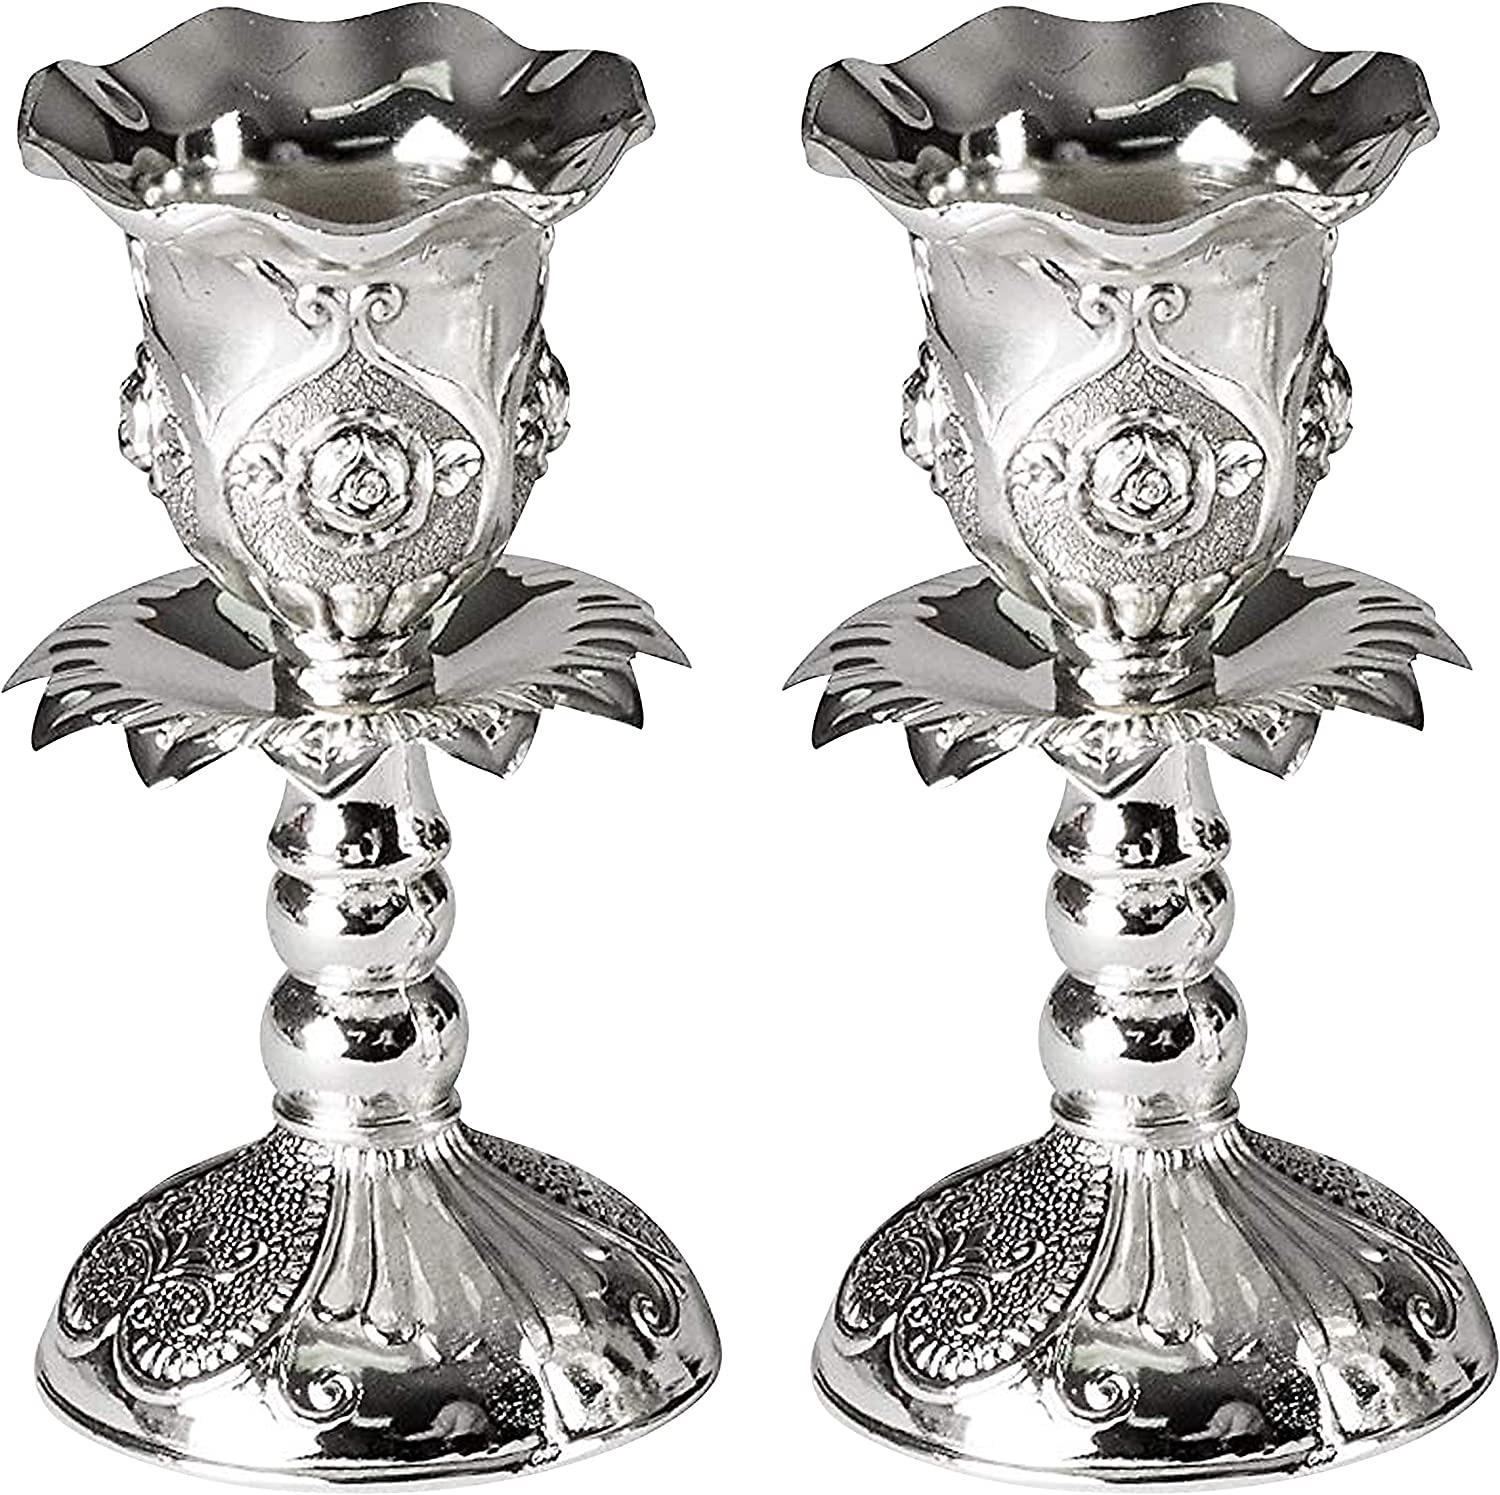 Silver Plated Candlesticks - 2 Pack Set - Pair of 4 Inch Ornate Candle Holders w